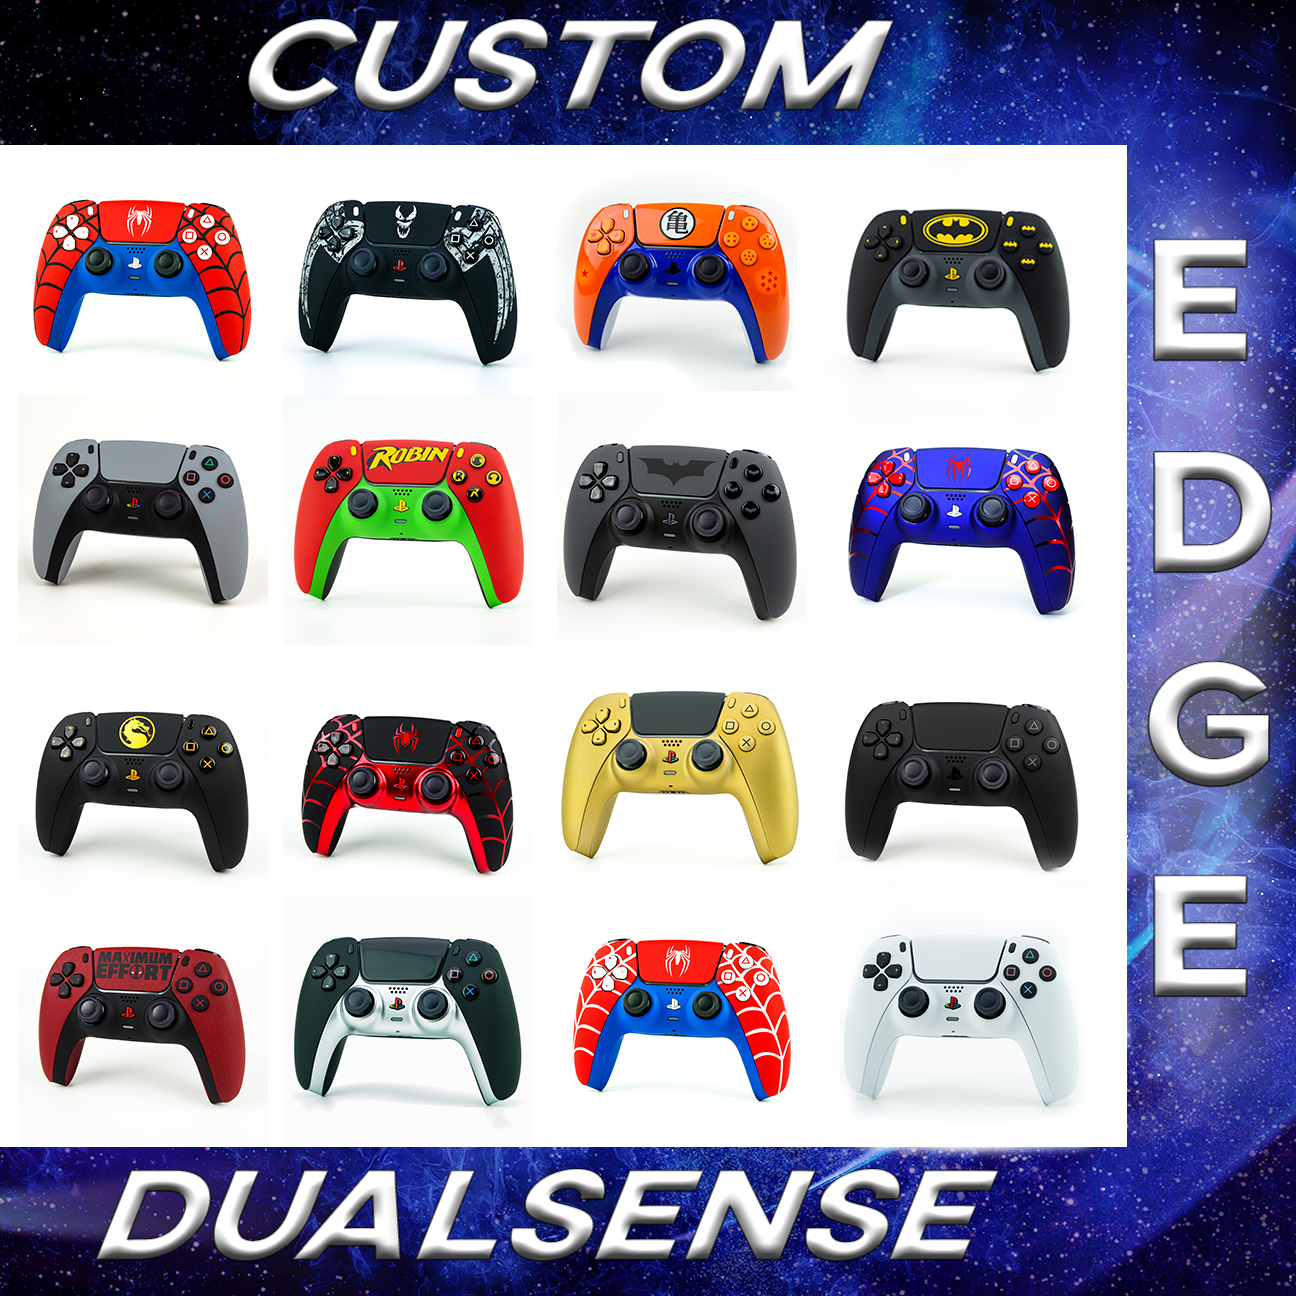 PS5 Dualsense edge controller: Everything you need to know